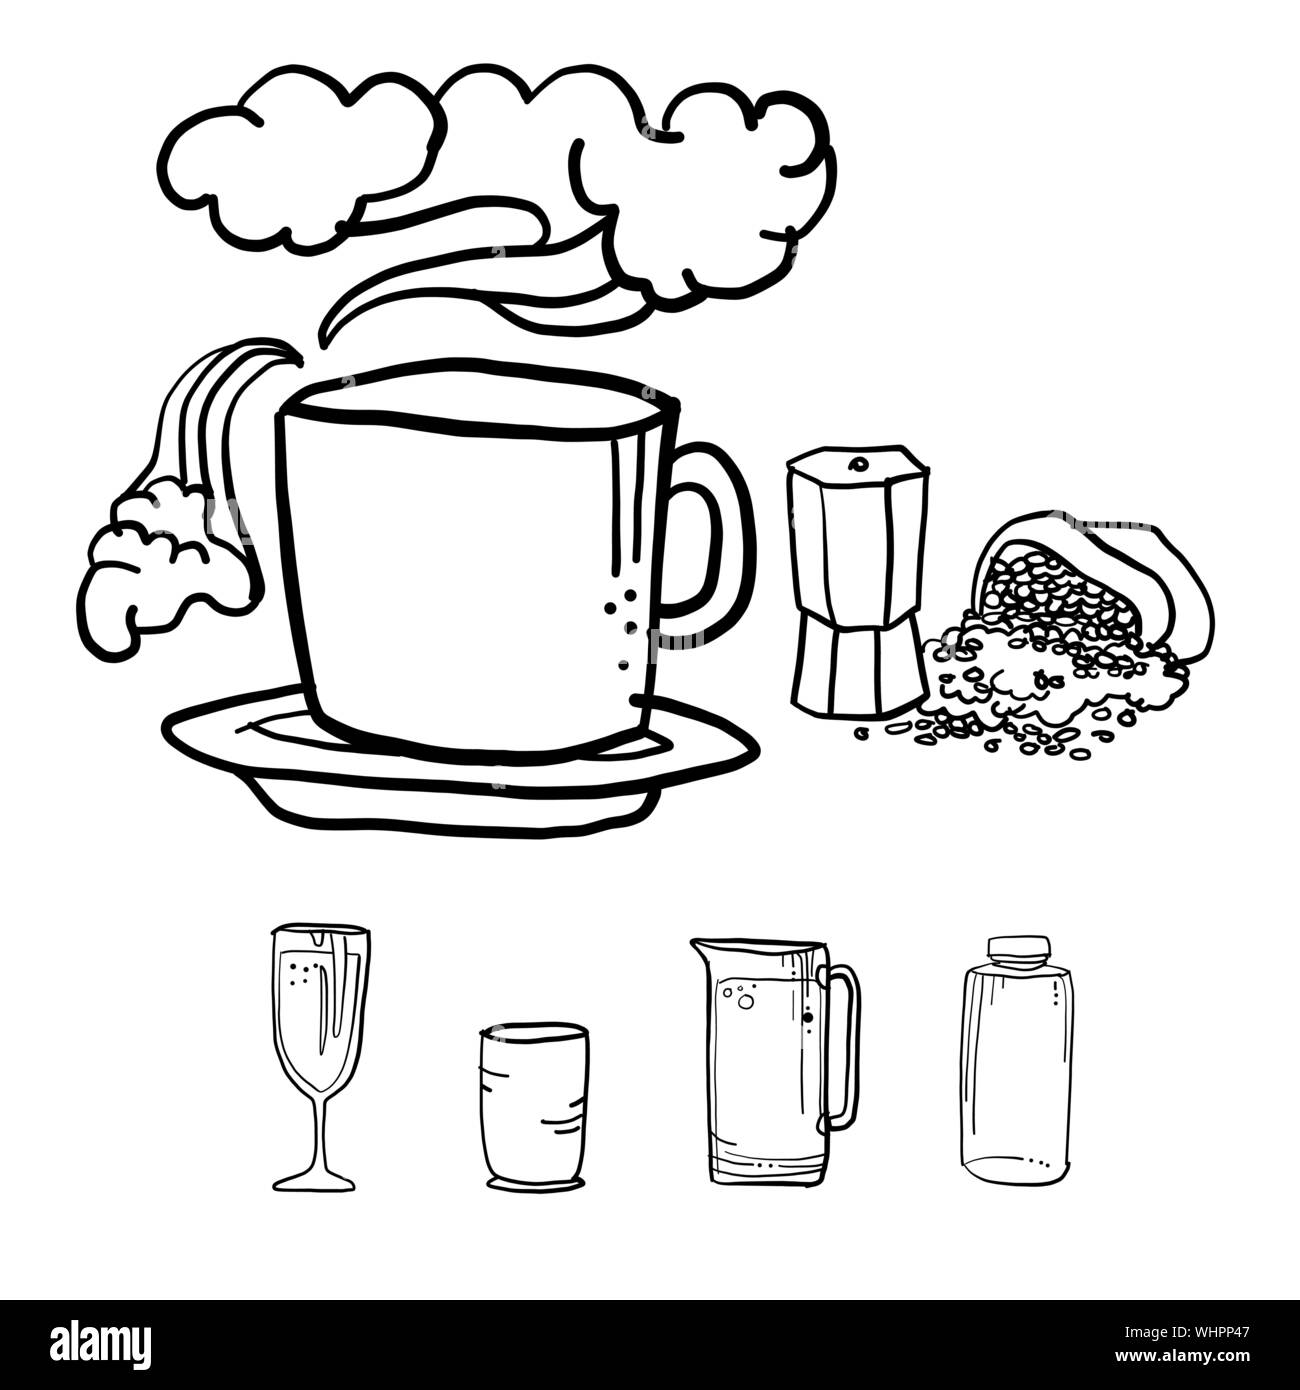 Coffee cup with kitchenware, drawing vector in doodle style Stock Vector